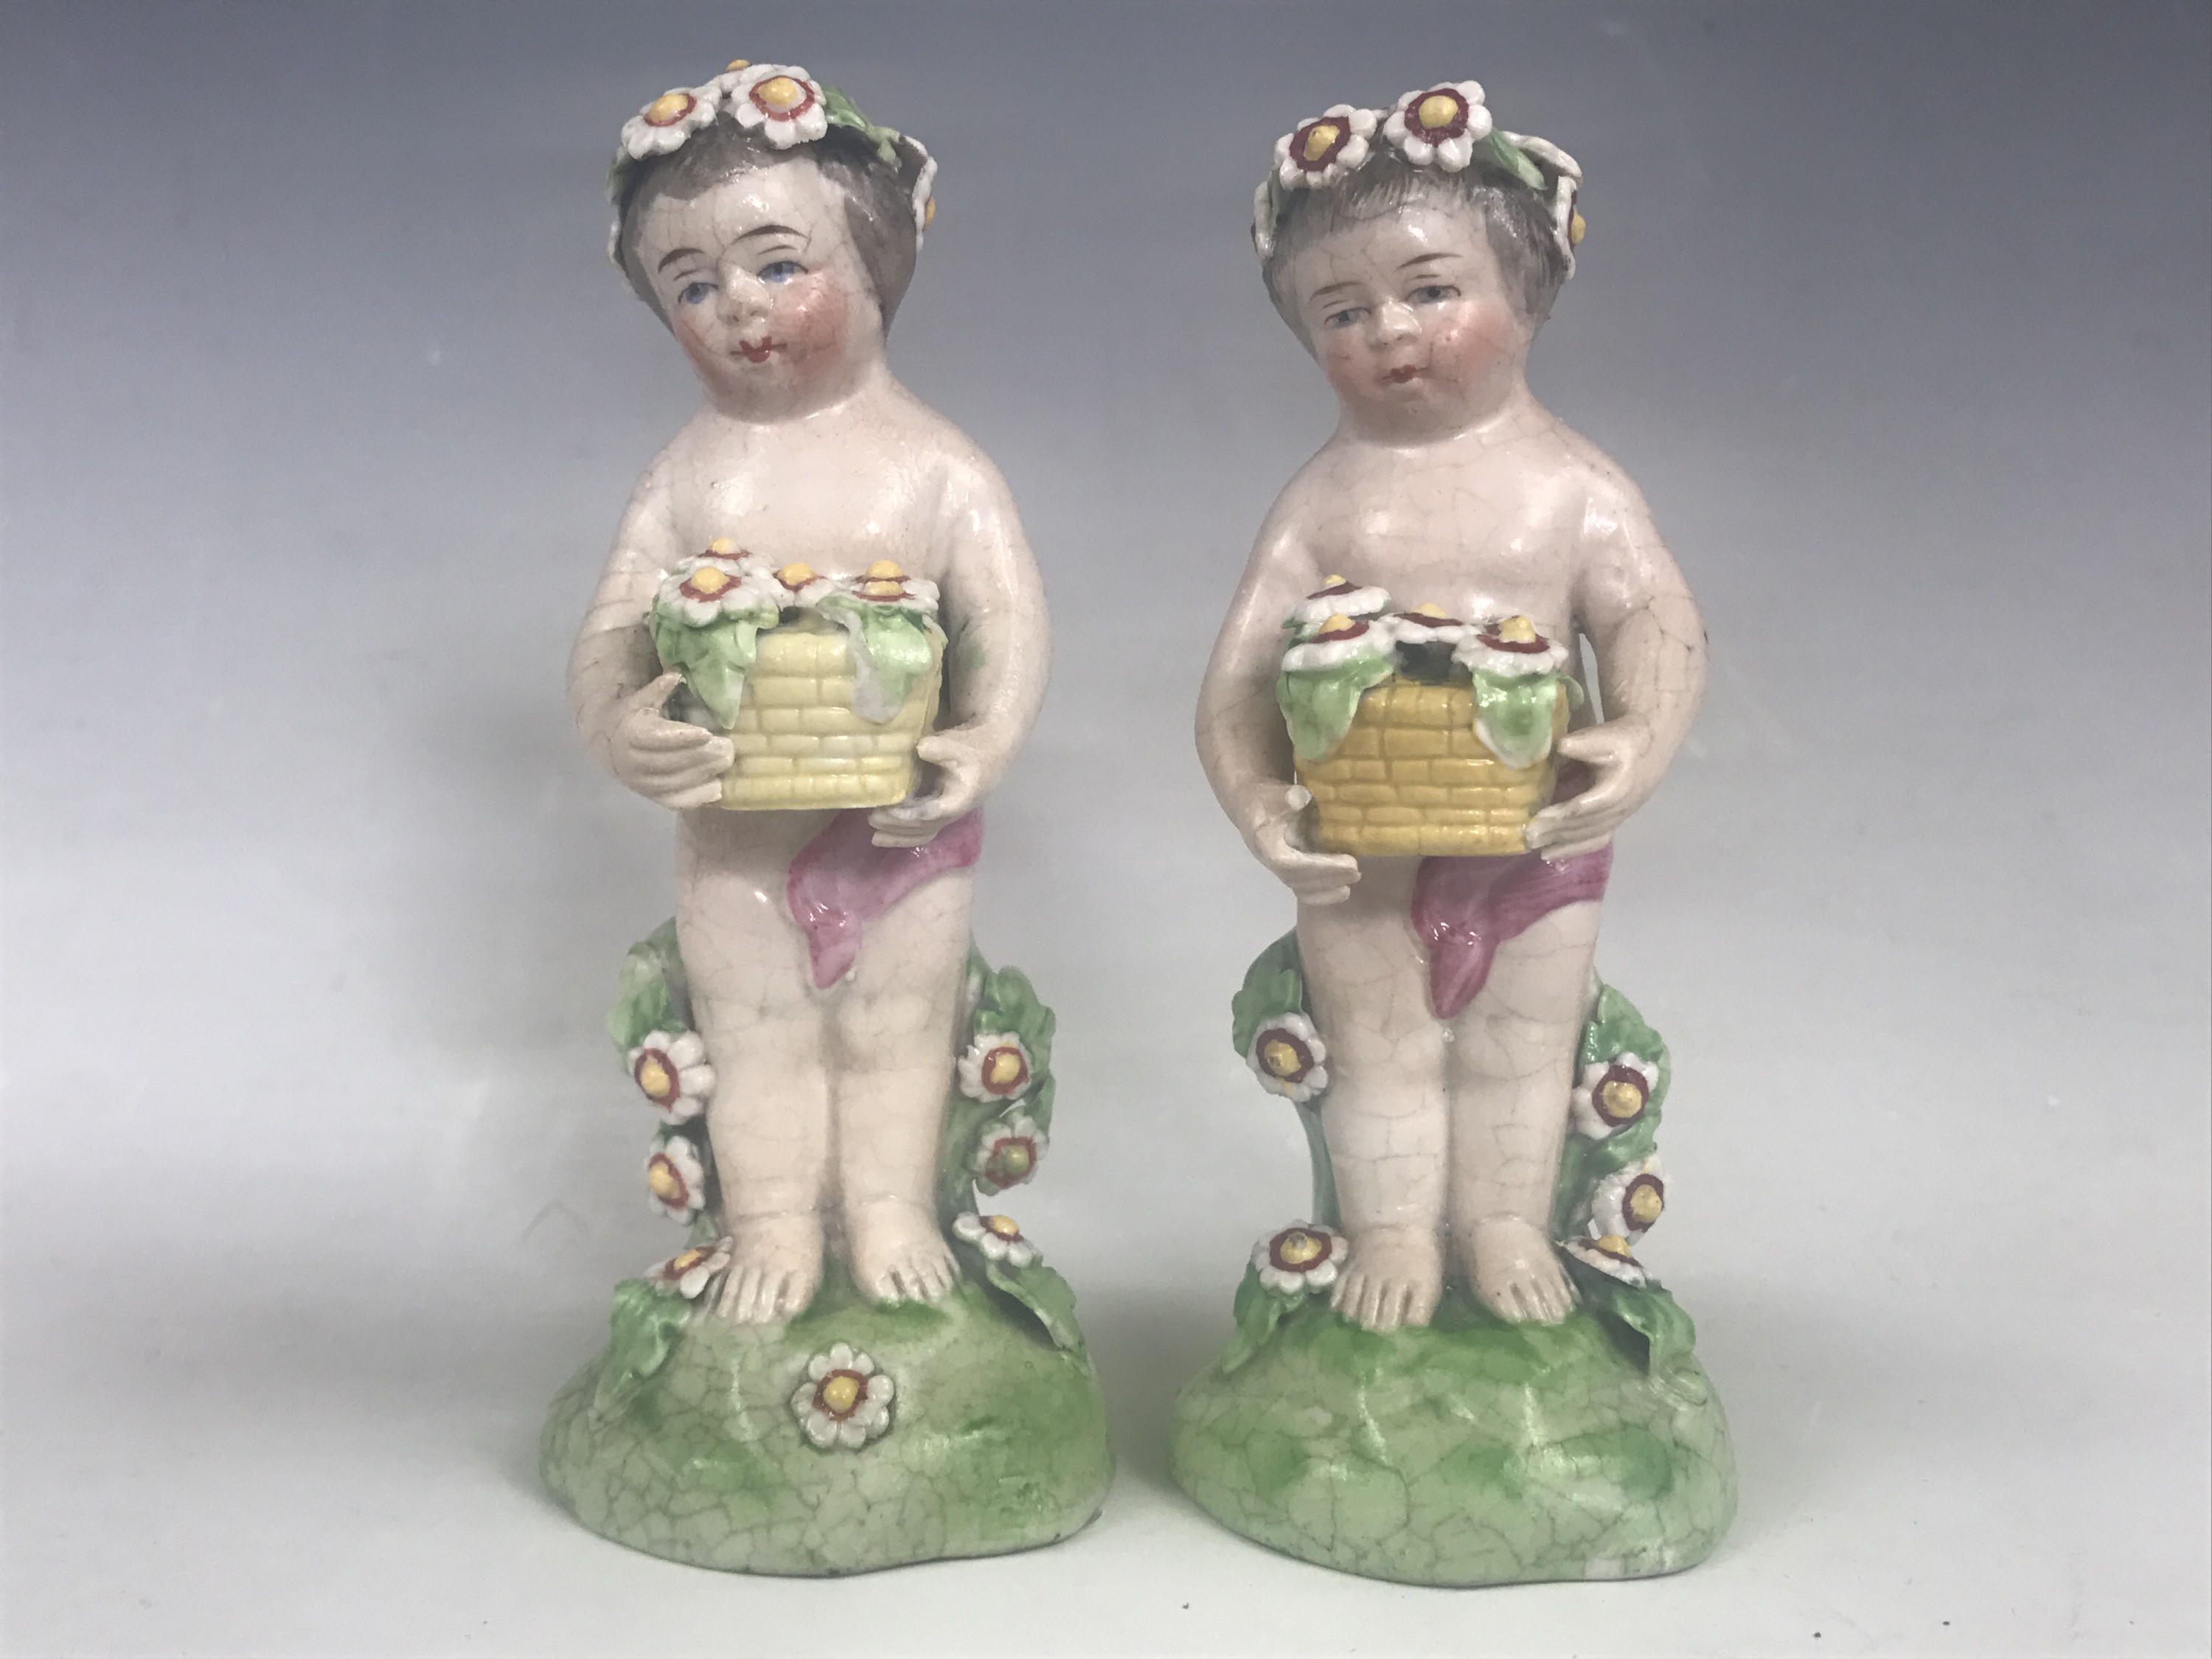 A pair of 19th Century porcelain figurines of putti, each holding aloft a basket of blooms, blue